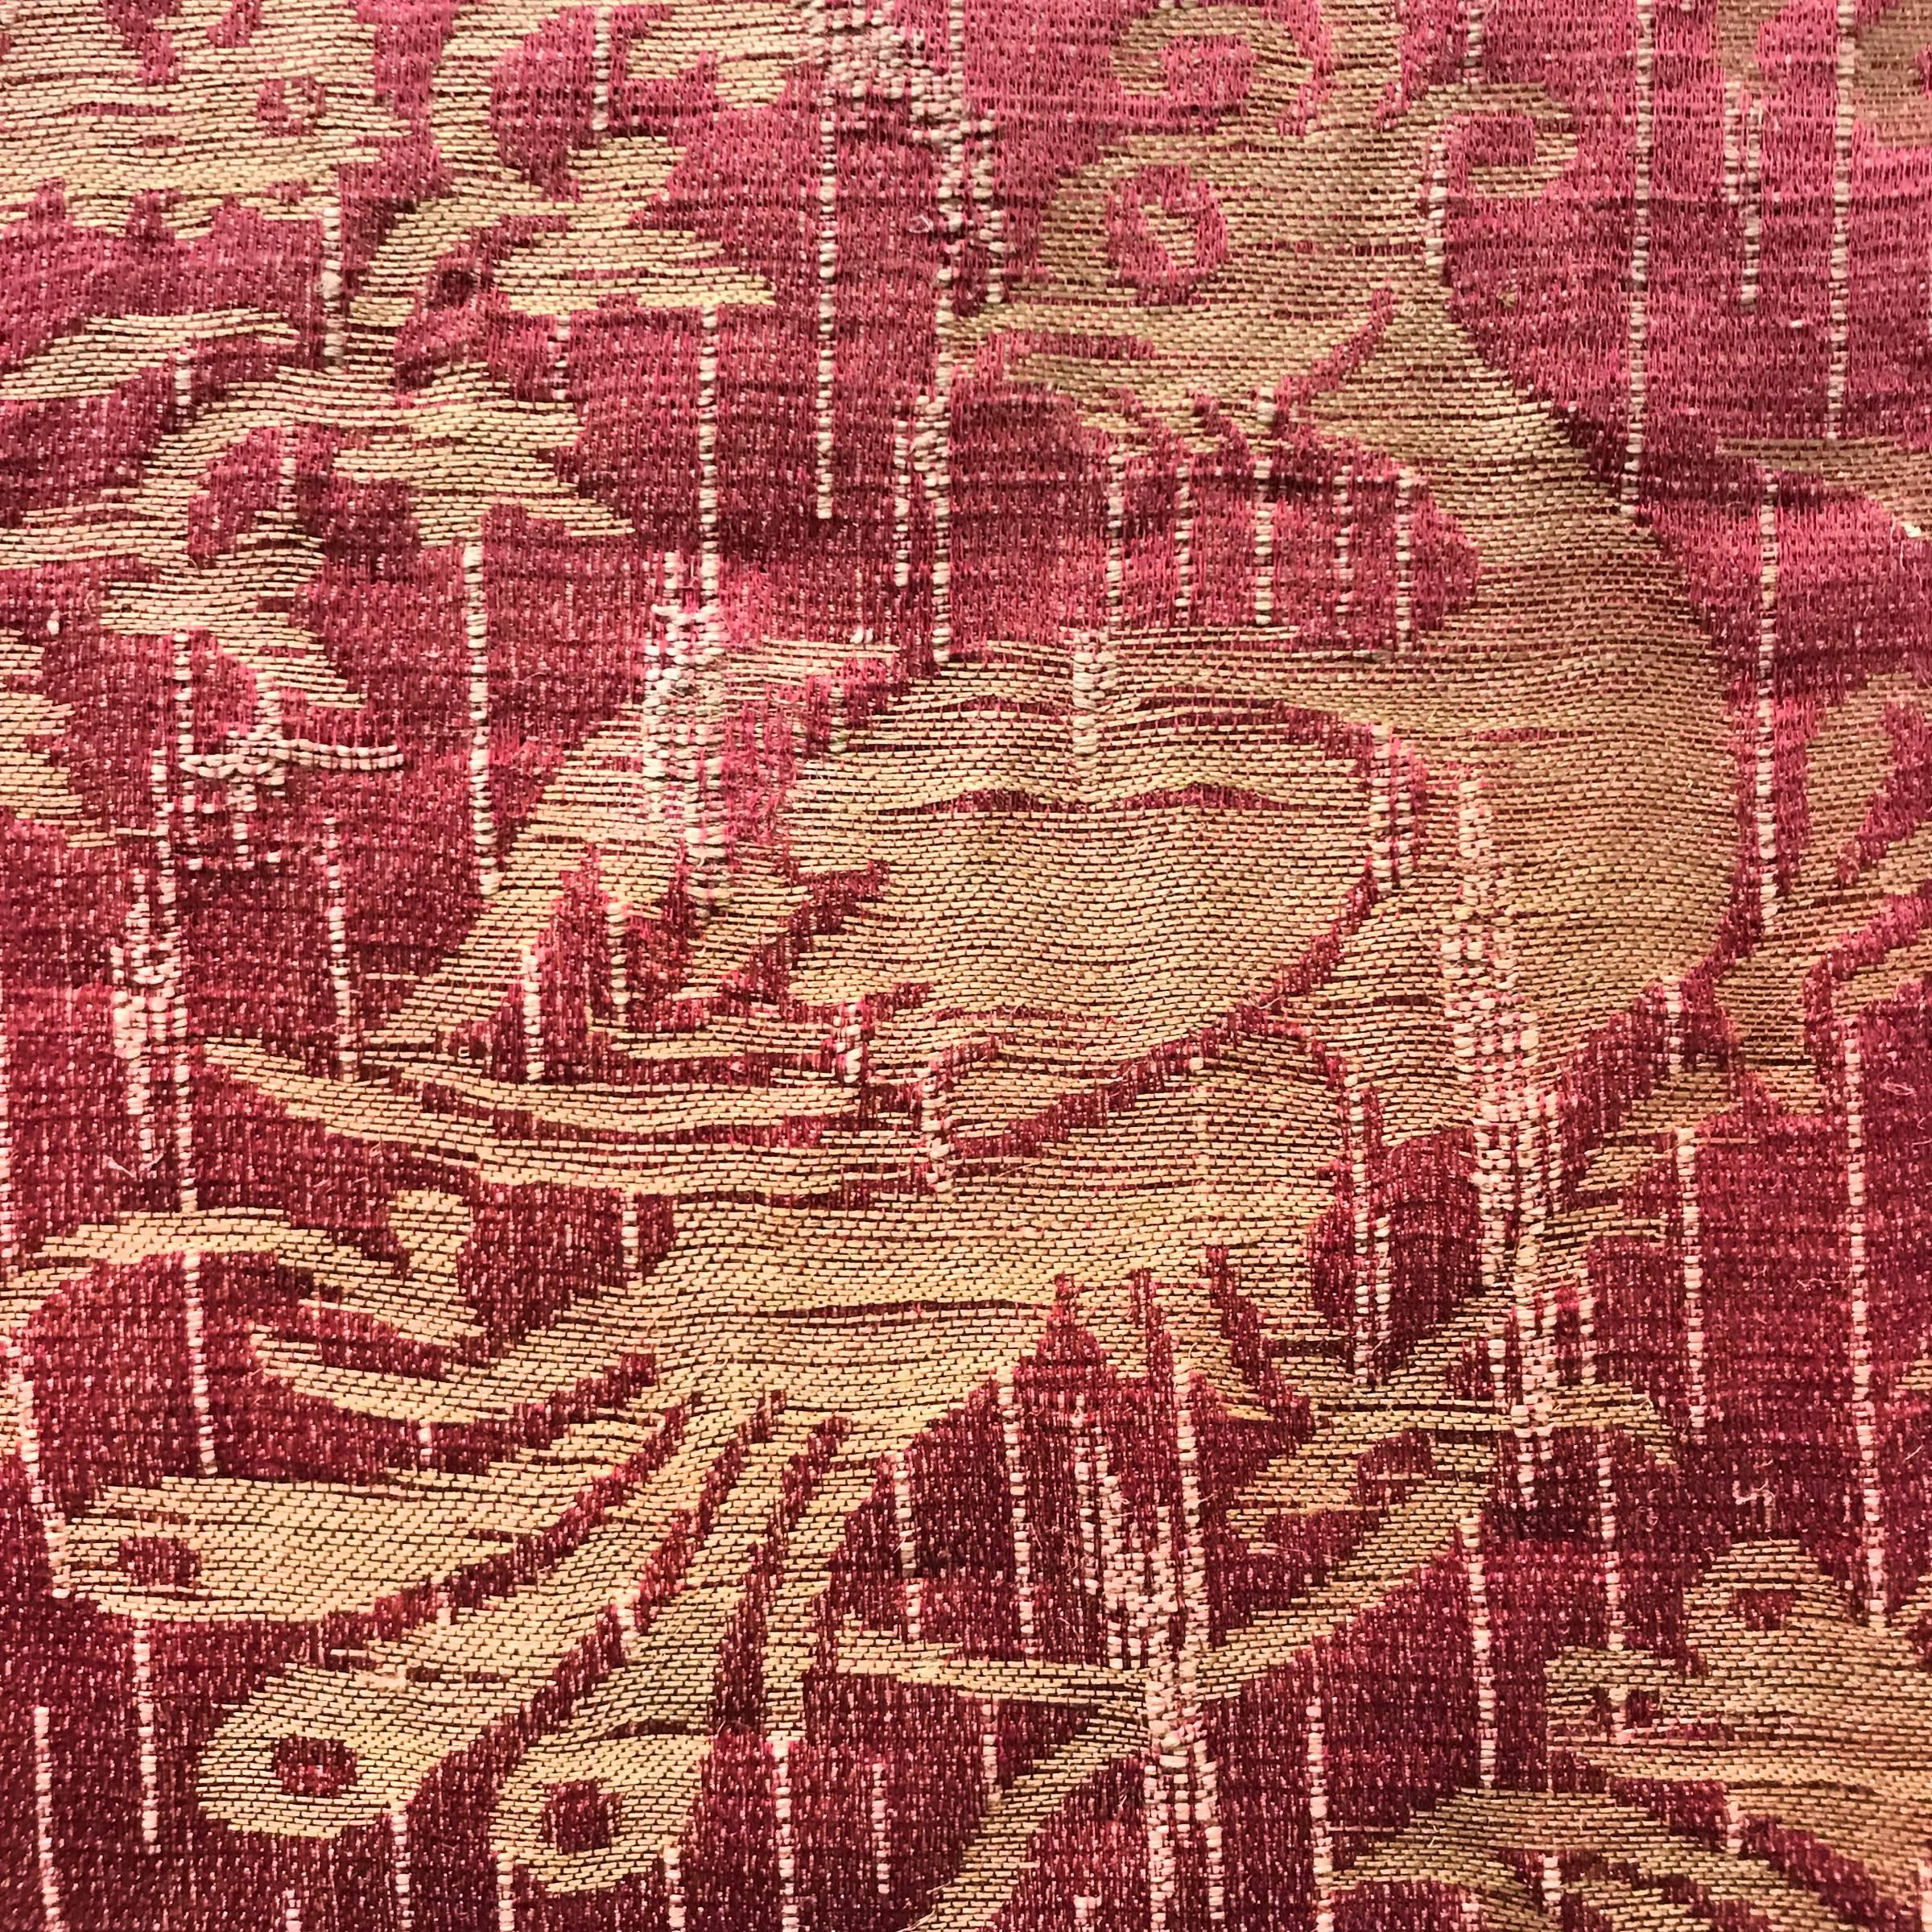 An unbelievably rare 18th century silk damask wall upholstery panel from a grand palazzo in the Umbria region of Italy. The panel contains a beautiful pattern of peacocks, leopards, and elements of Orientalist architecture. The ground is a cranberry